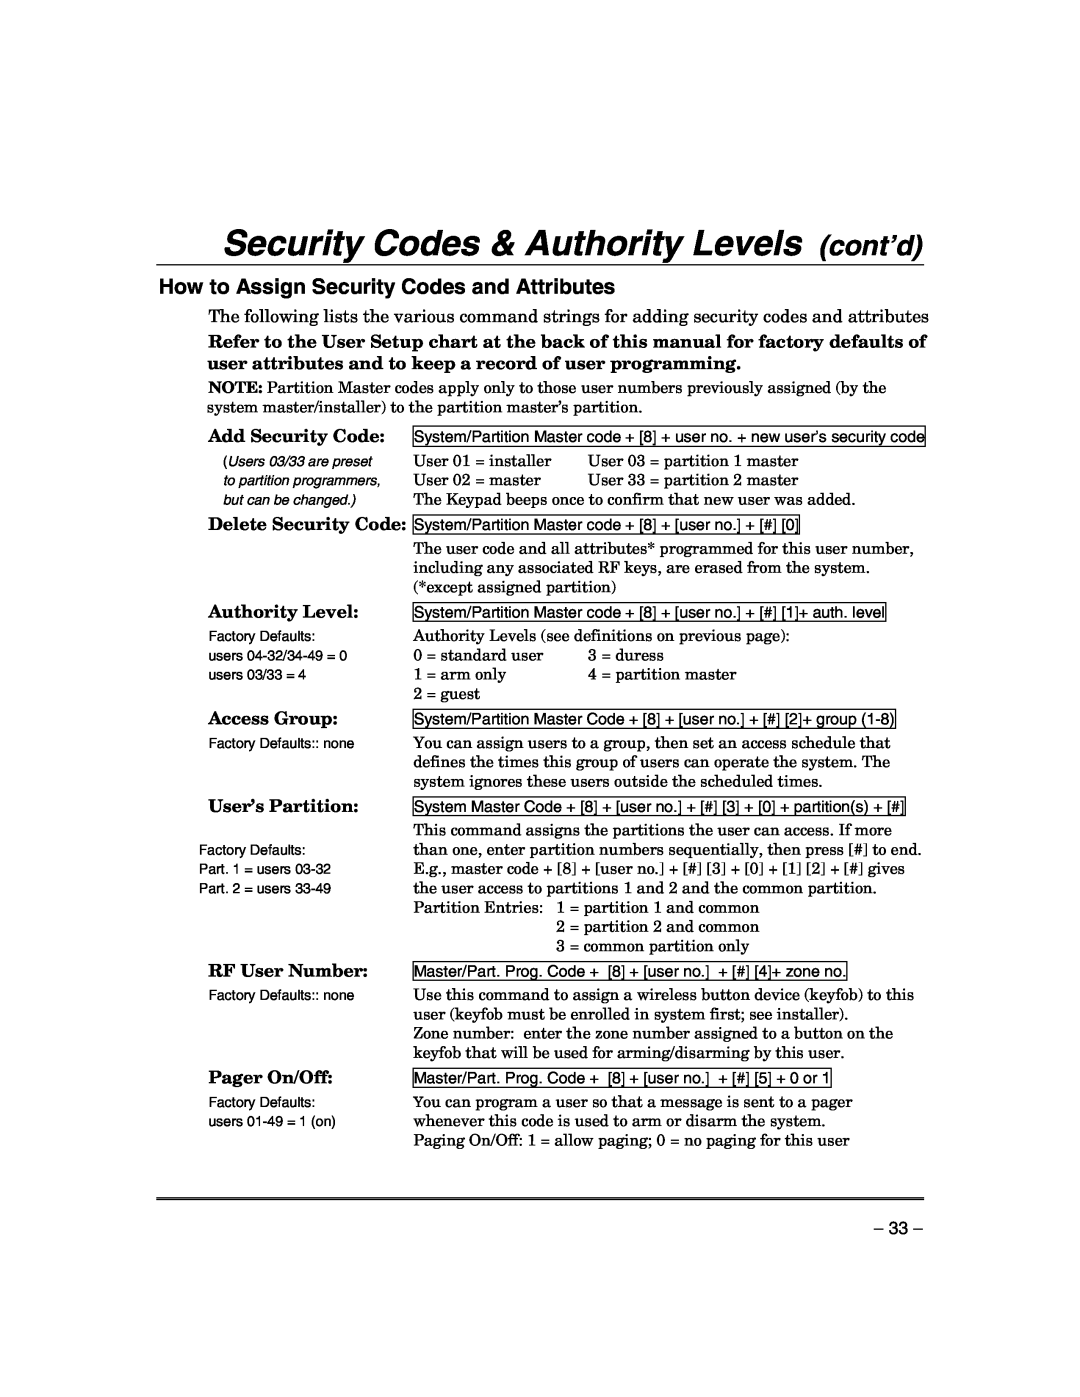 Honeywell VISTA-21IP Security Codes & Authority Levels cont’d, How to Assign Security Codes and Attributes, Access Group 